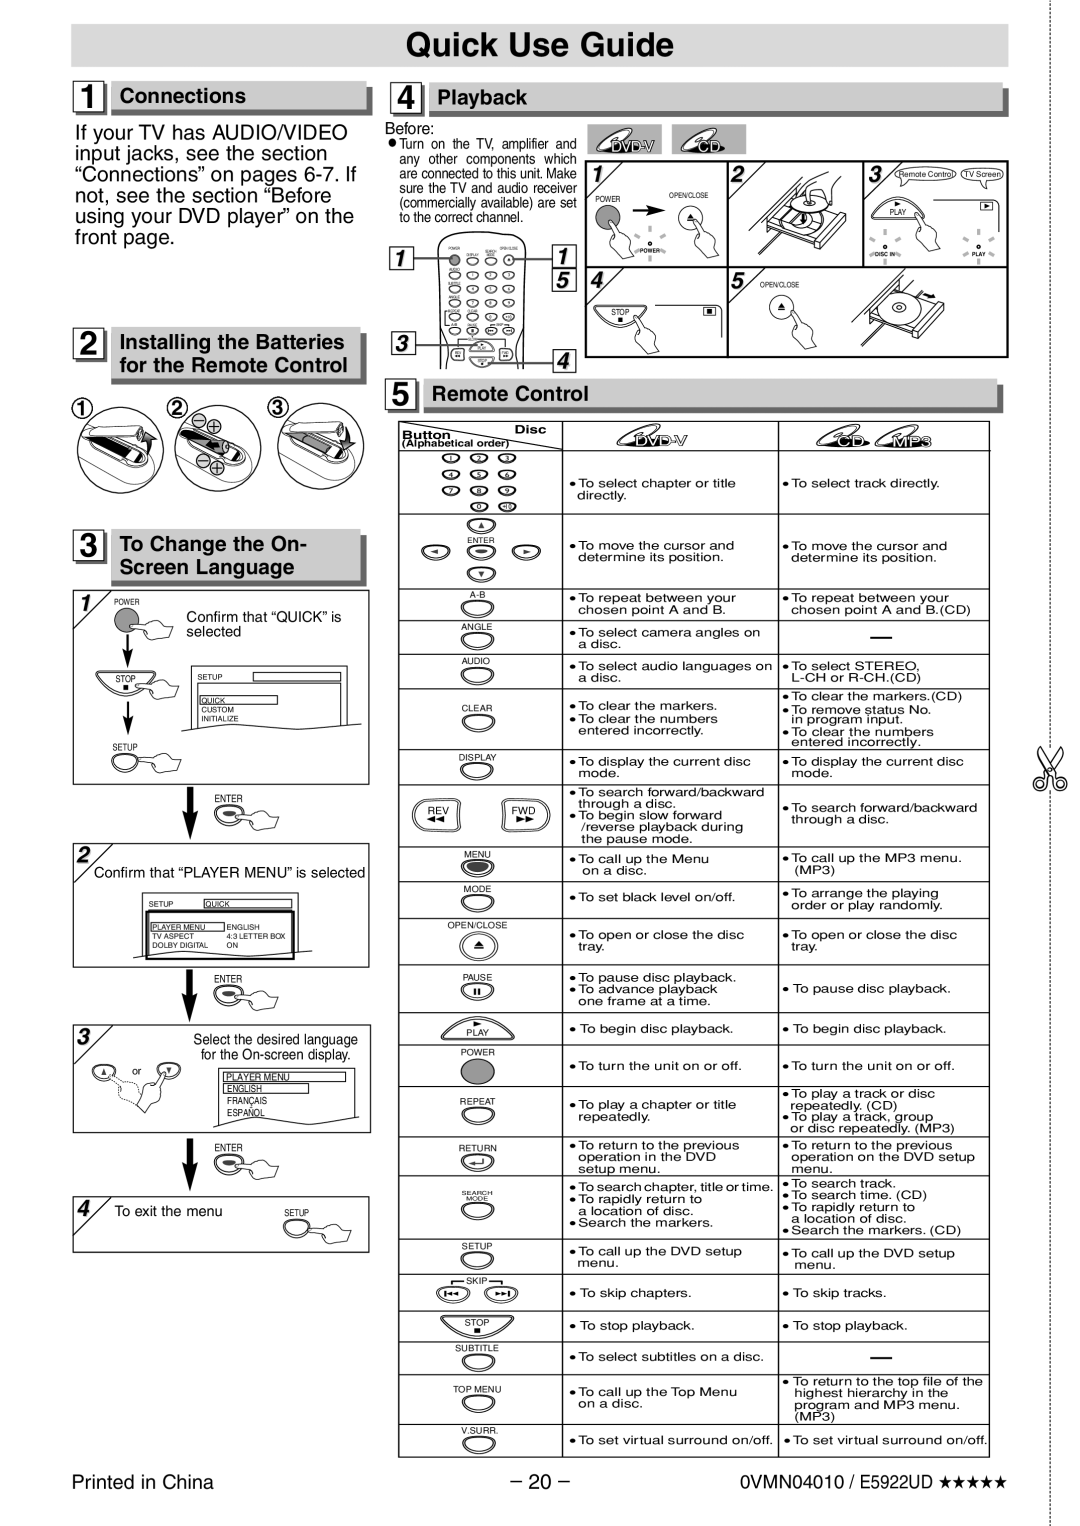 Sylvania DVL100E Quick Use Guide, Connections, Playback, Installing the Batteries, for the Remote Control, Dvd-V, selected 